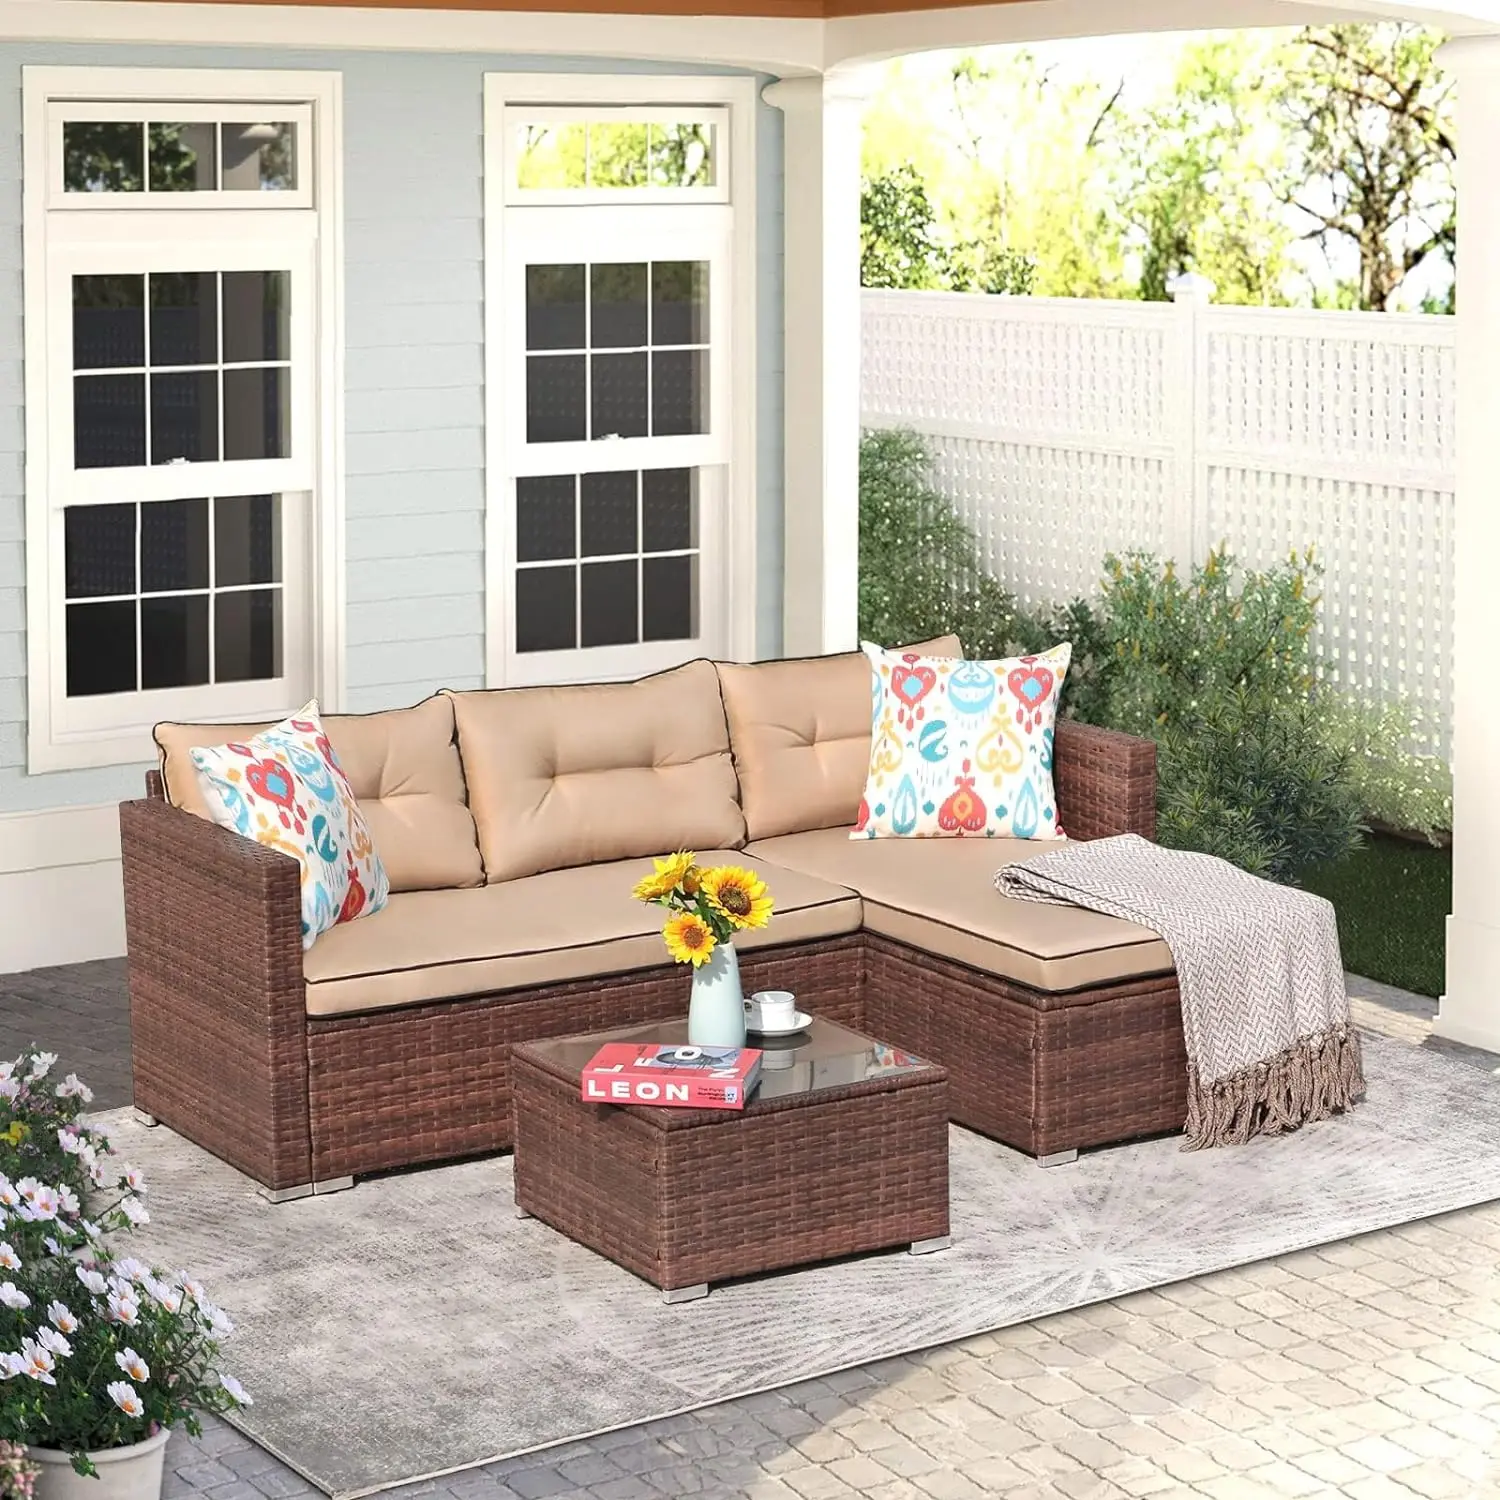 

Outdoor Patio Furniture Set, All-Weather Wicker Rattan Furniture Sofa Set, with Cushions, Tempered Glass Coffee Table,